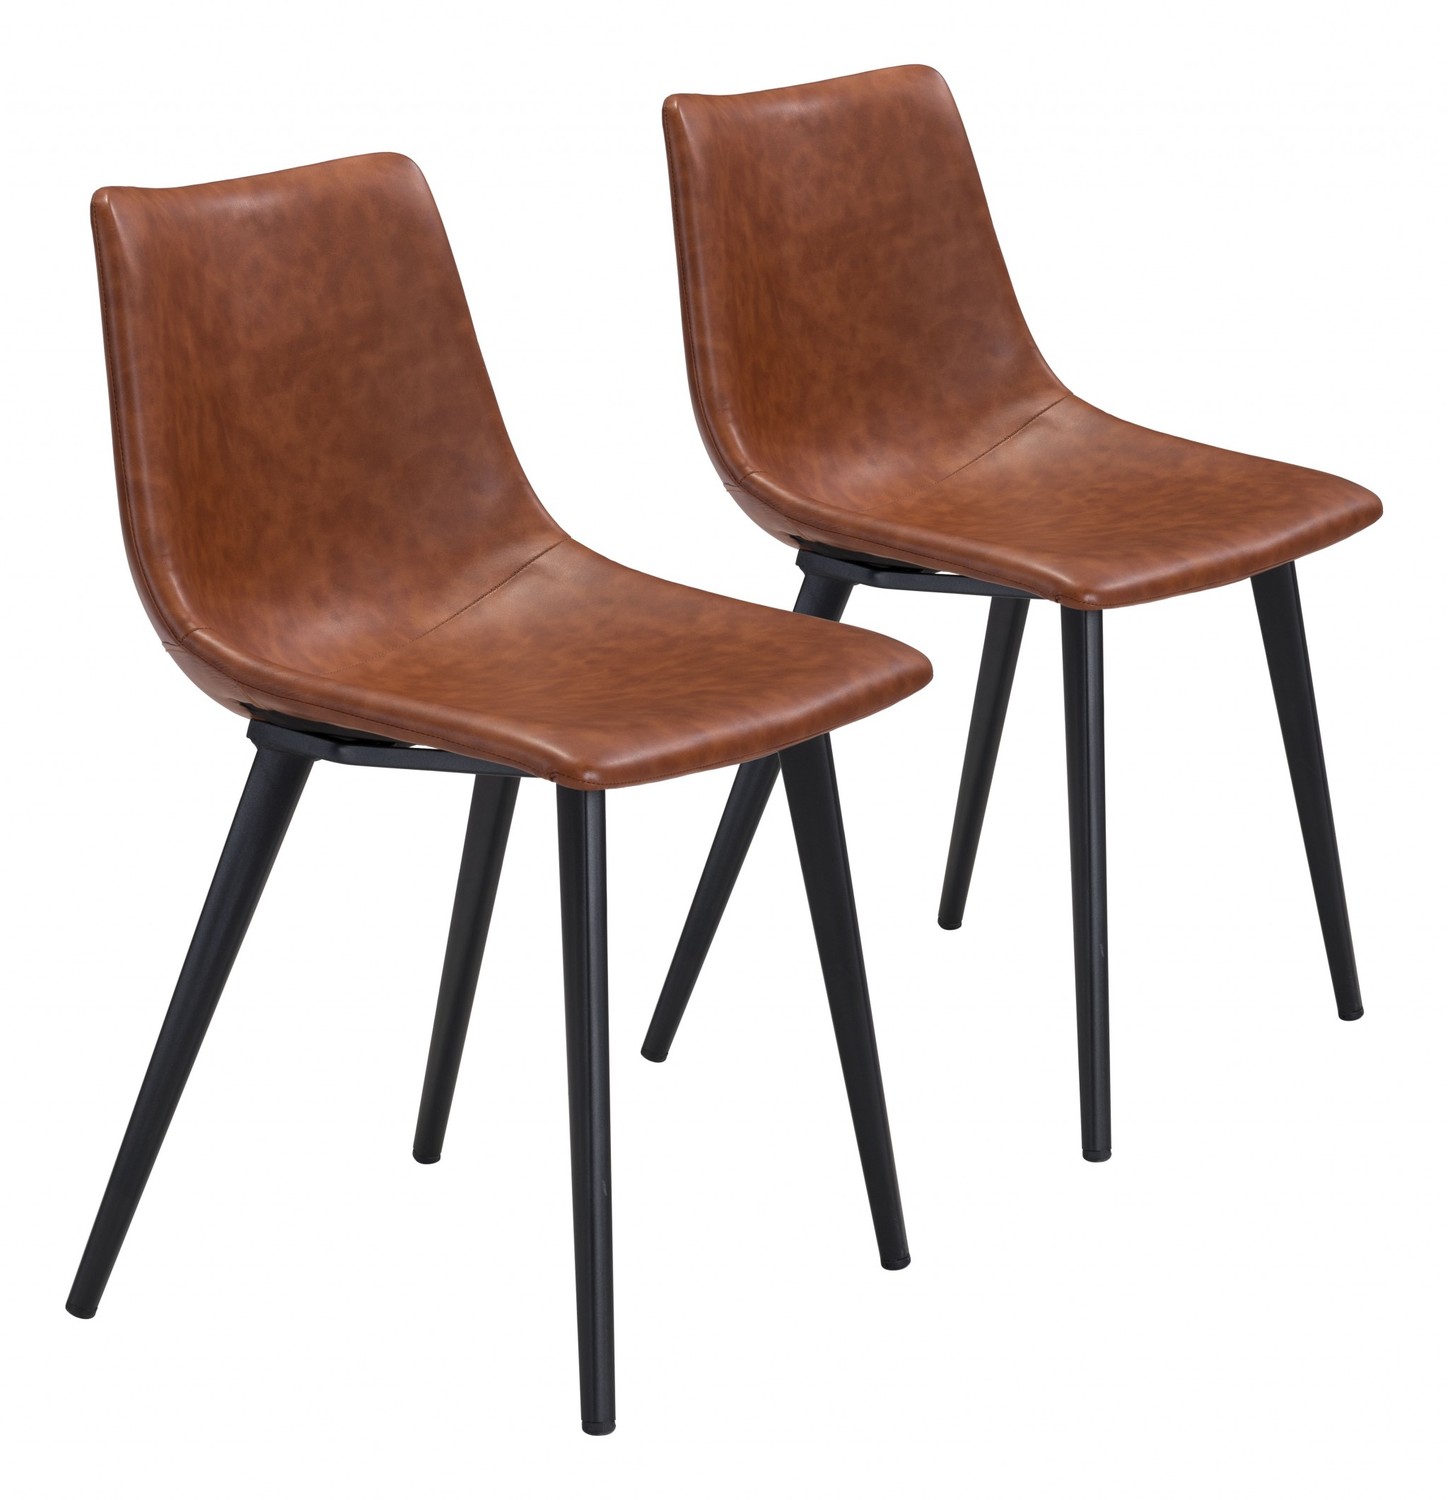 Set of Two Brown Vintage Look Faux Leather Slight Scoop Dining Chairs